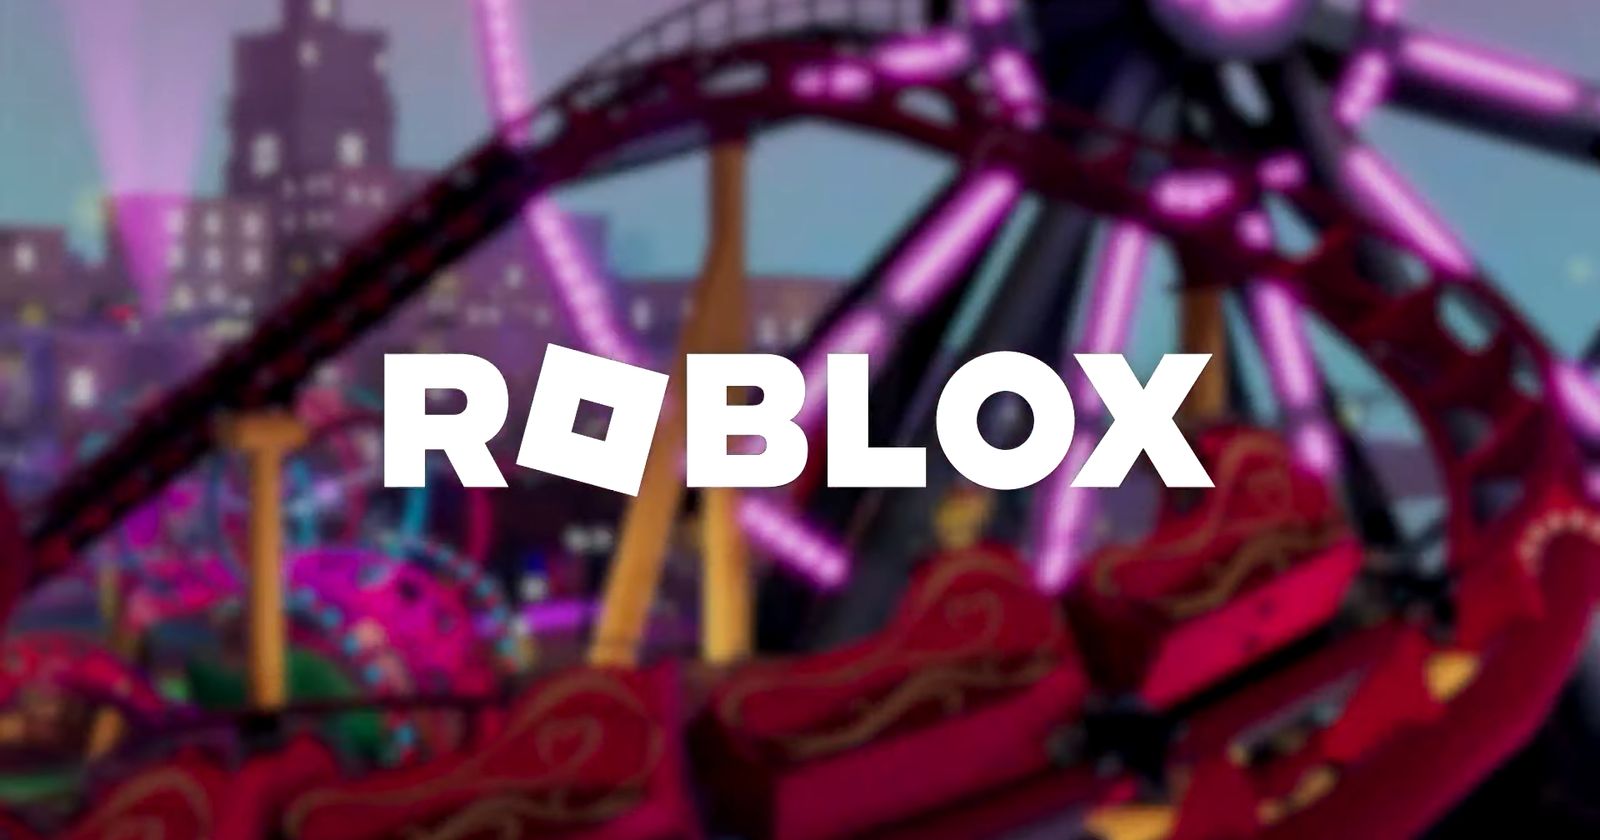 Roblox PlayStation Release Date And Time